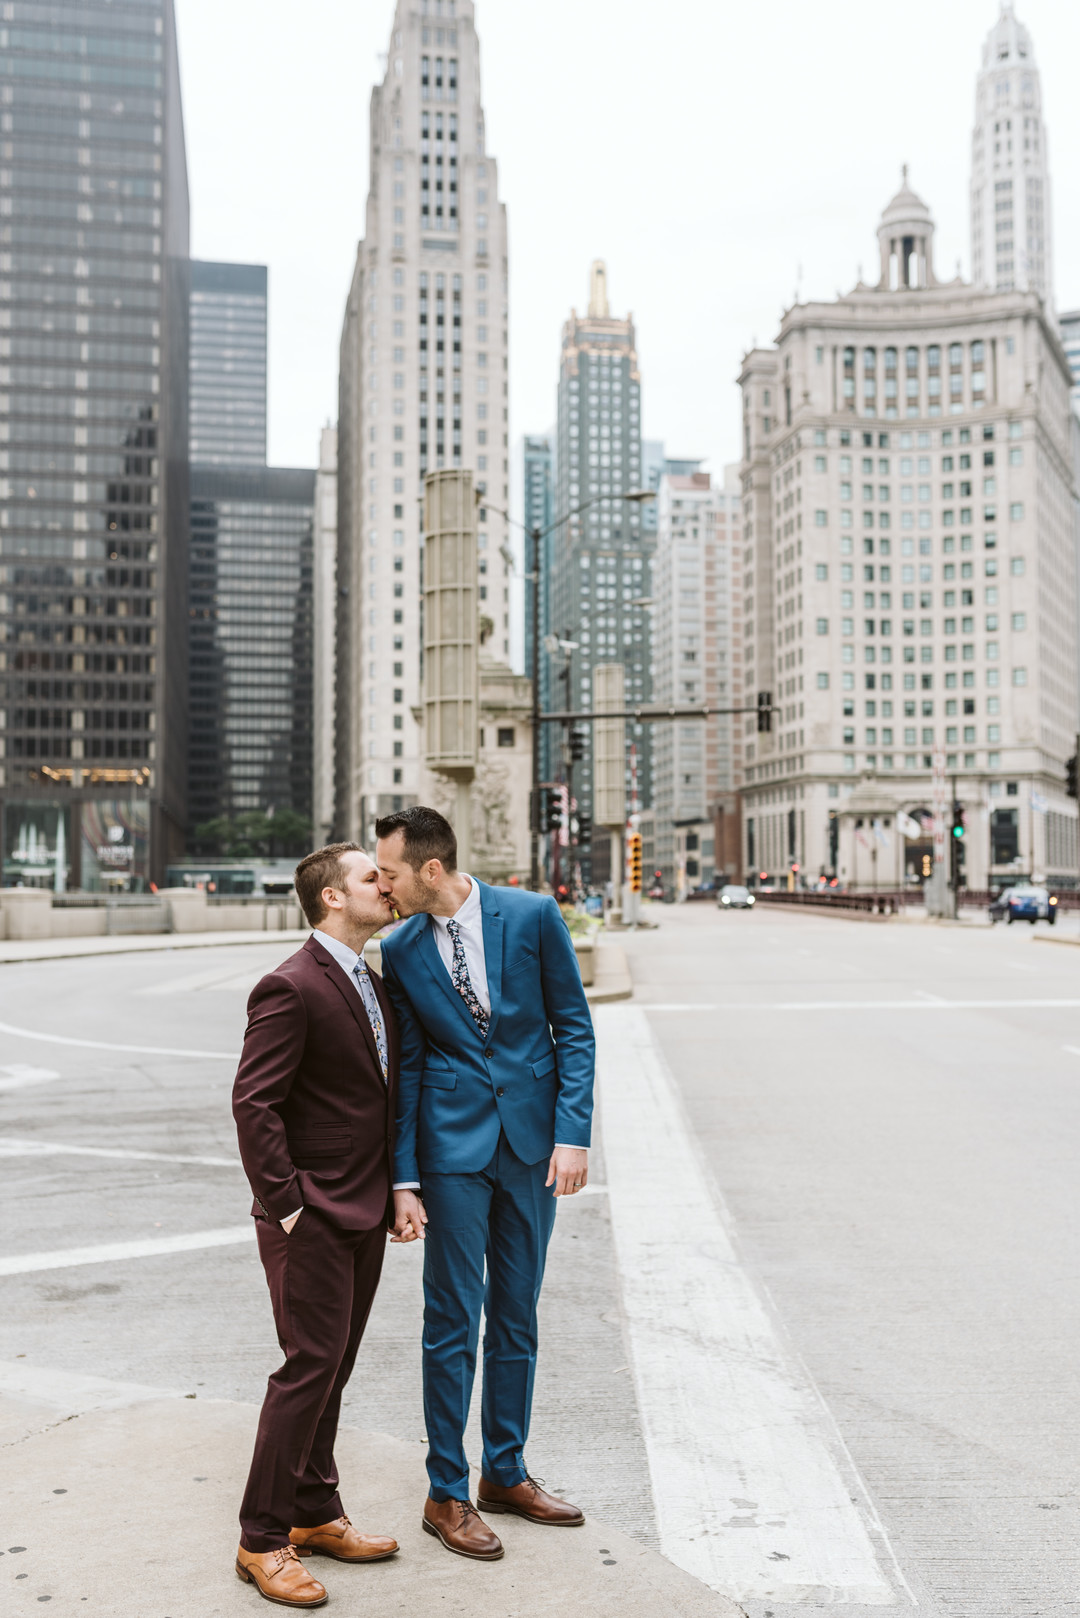 Stylish Downtown Chicago Engagement captured by Gavyn Taylor Photo. See more engagement photo ideas on CHItheeWED.com!